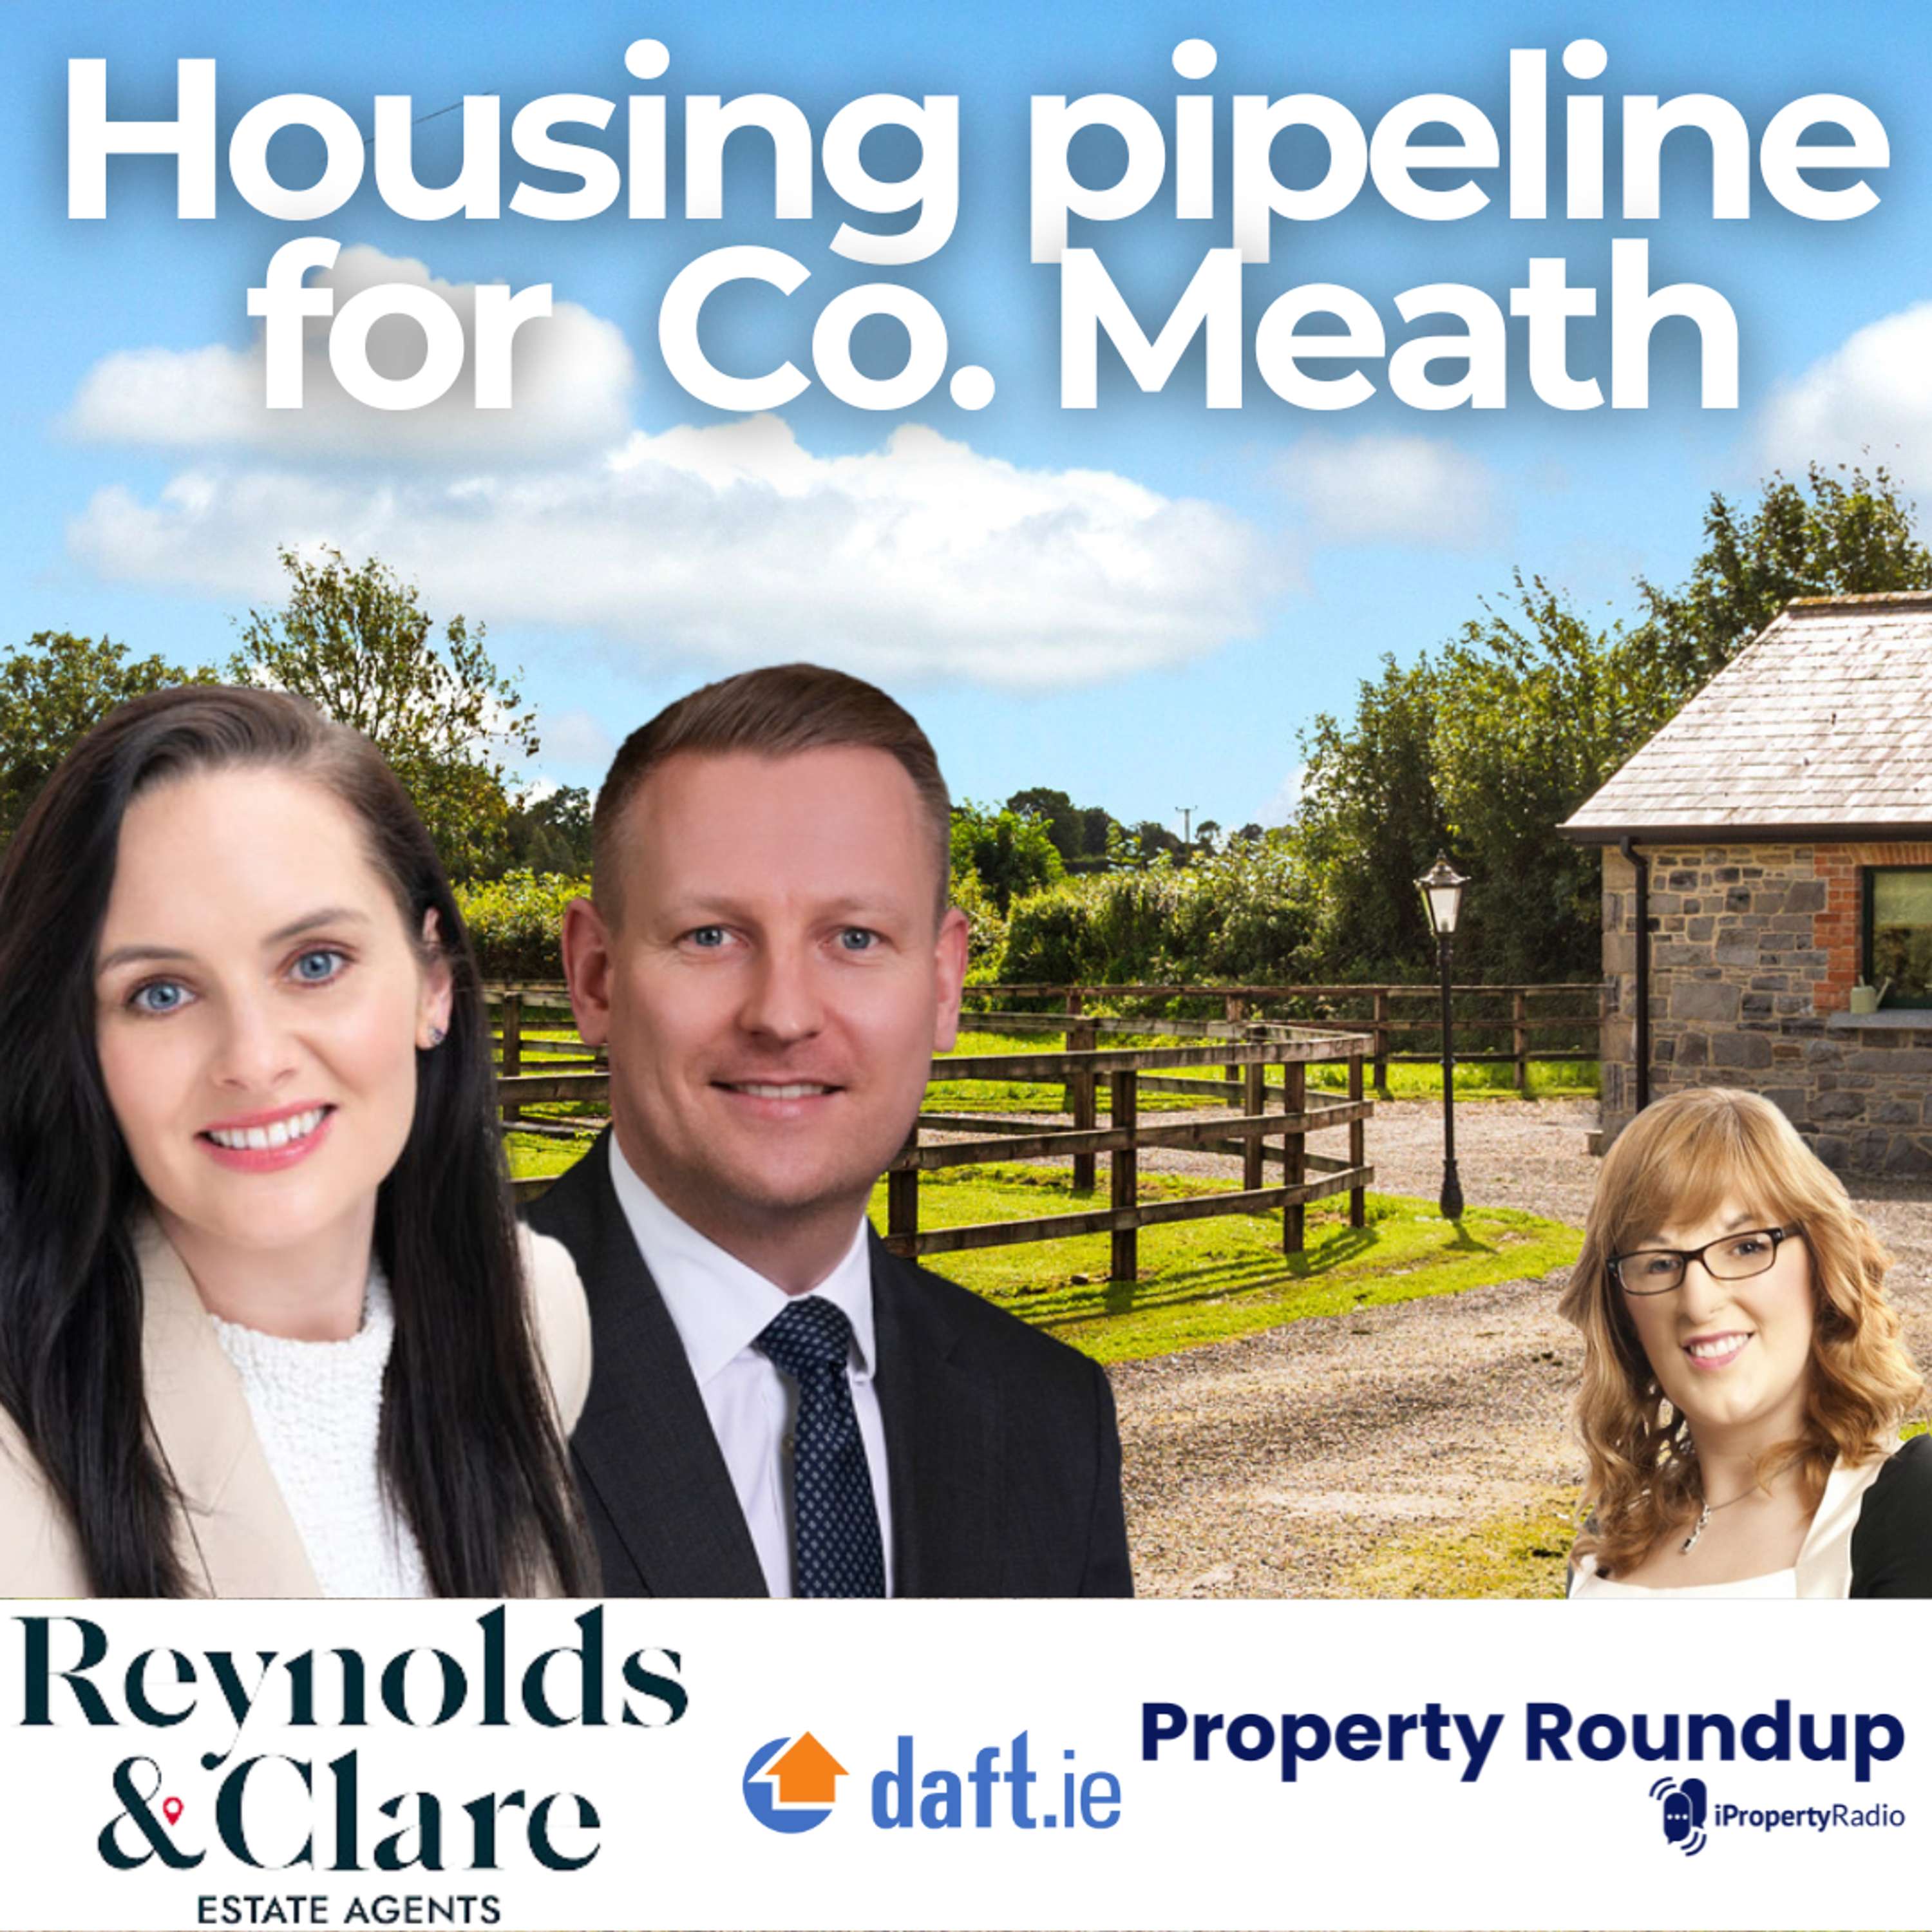 Housing pipeline for Co. Meath